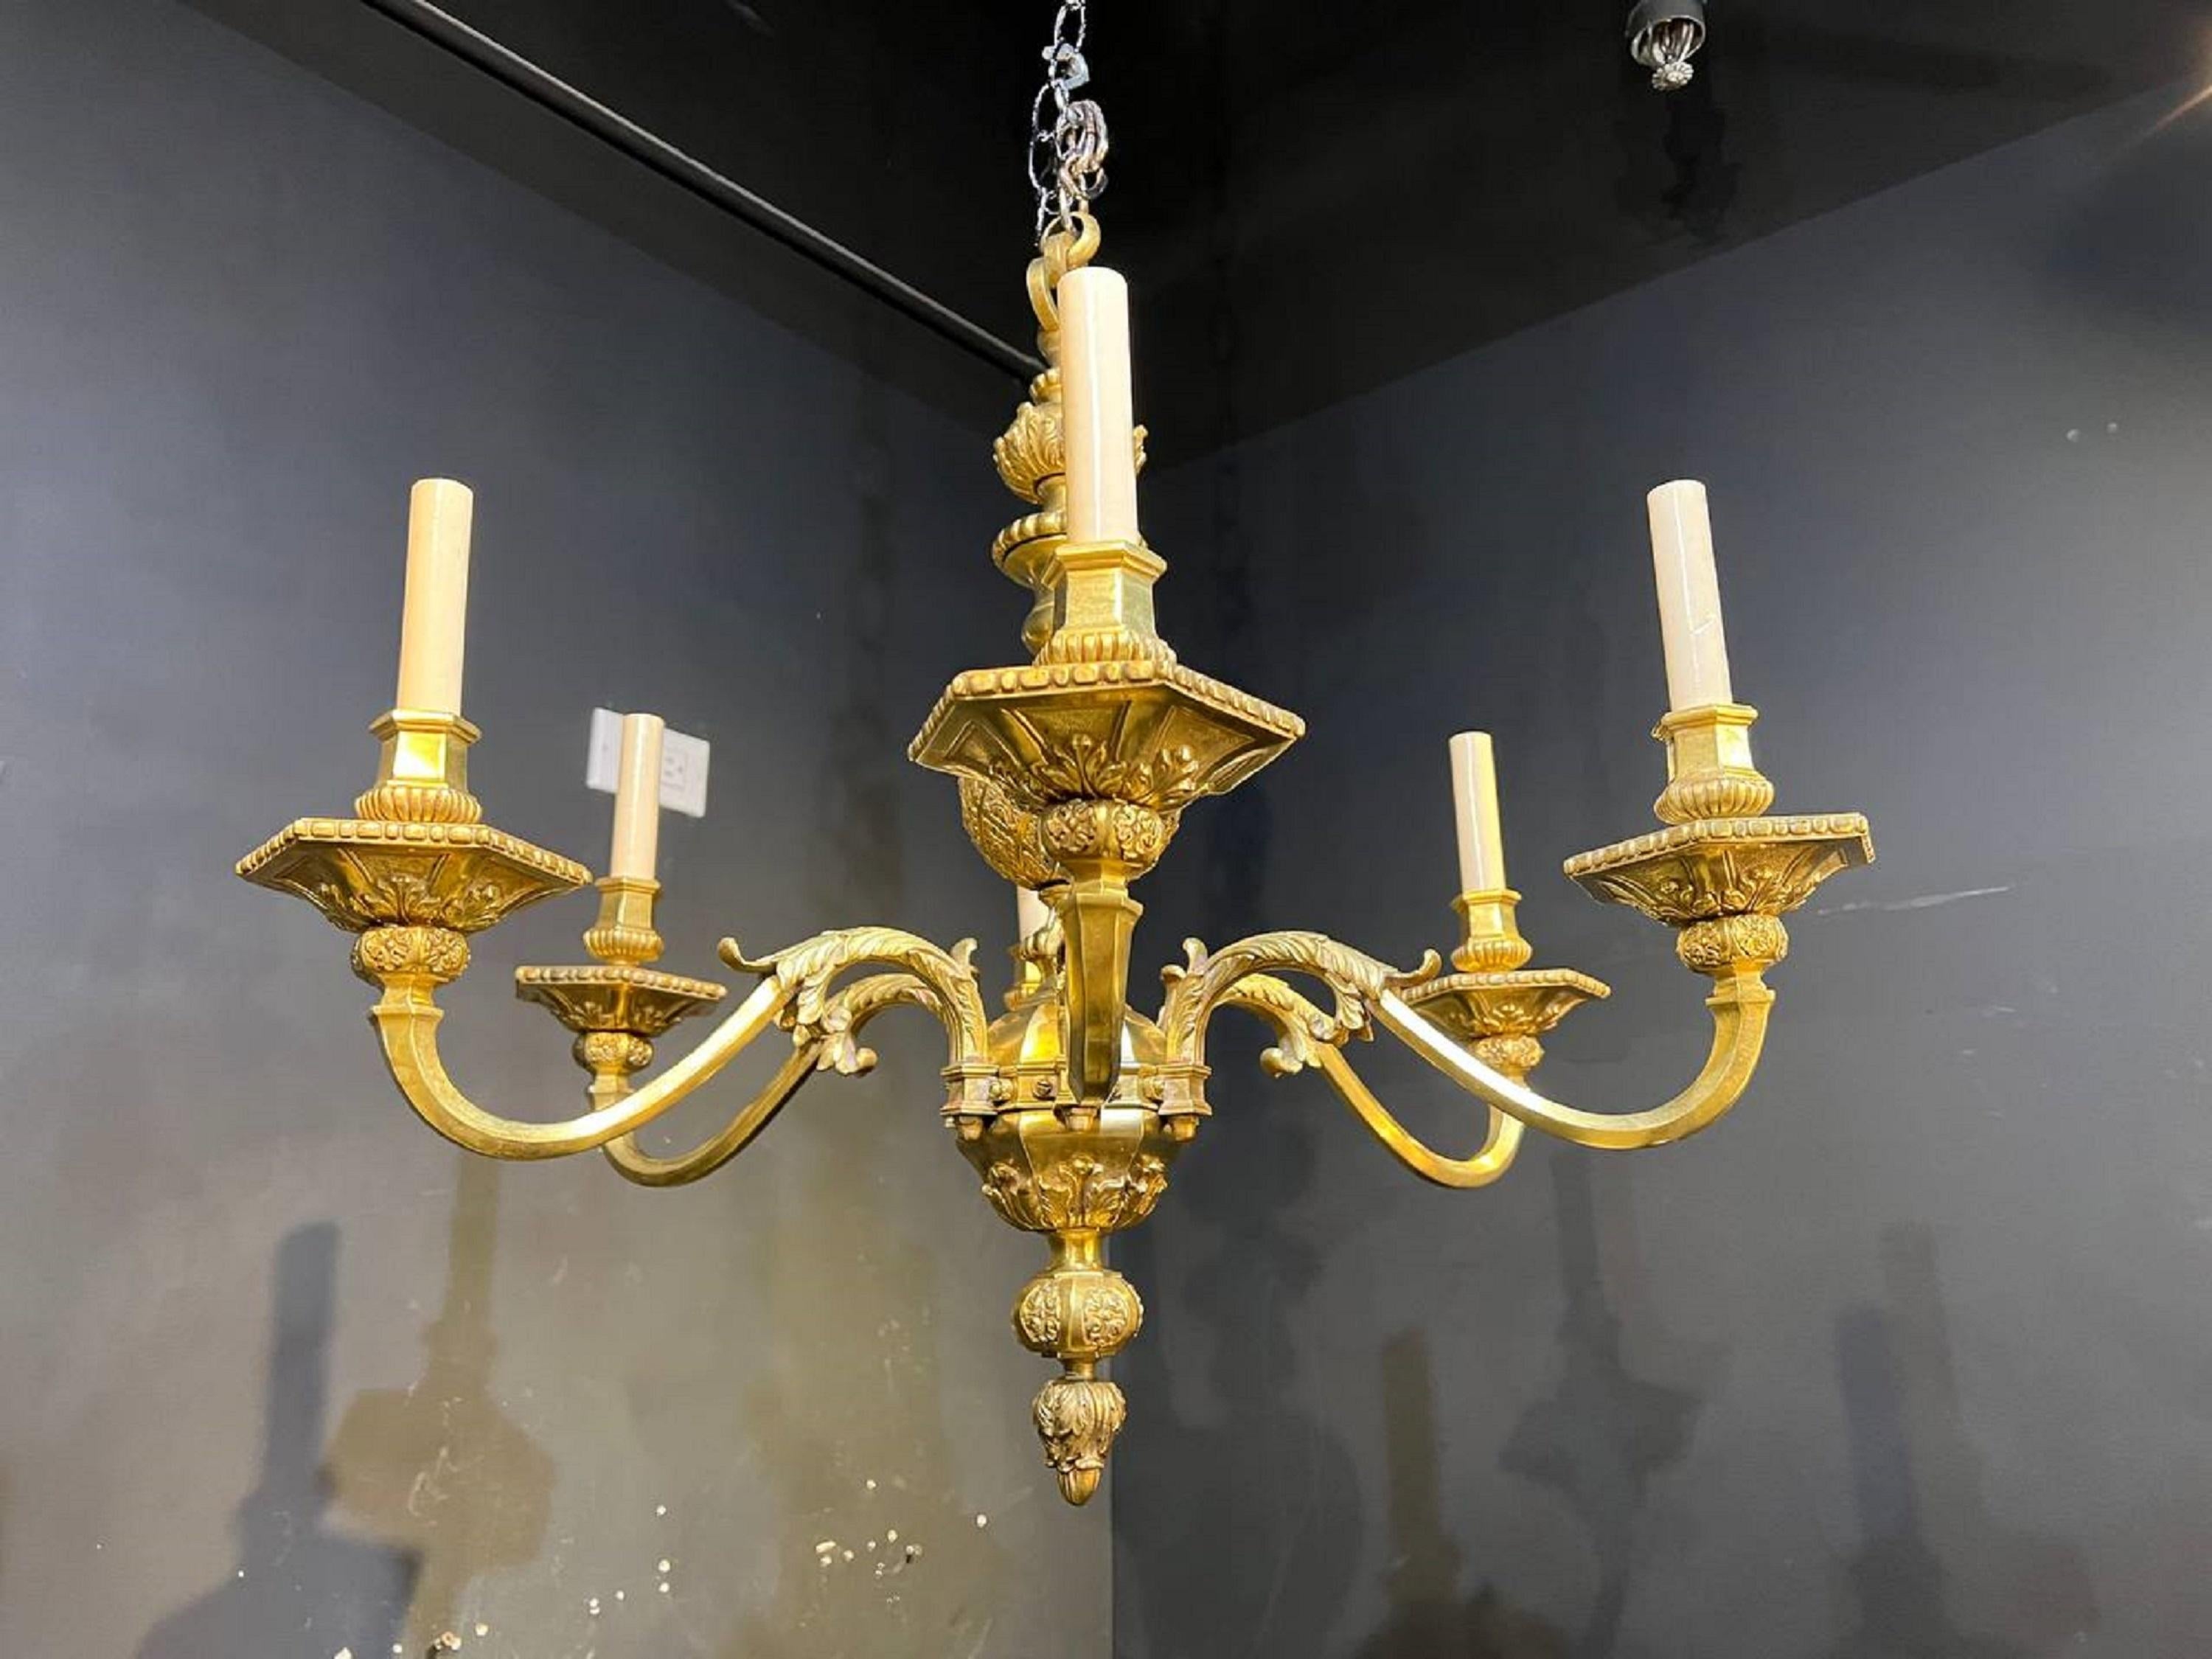 Neoclassical 1900's Caldwell Bronze Engraved Chandelier with 6 lights For Sale